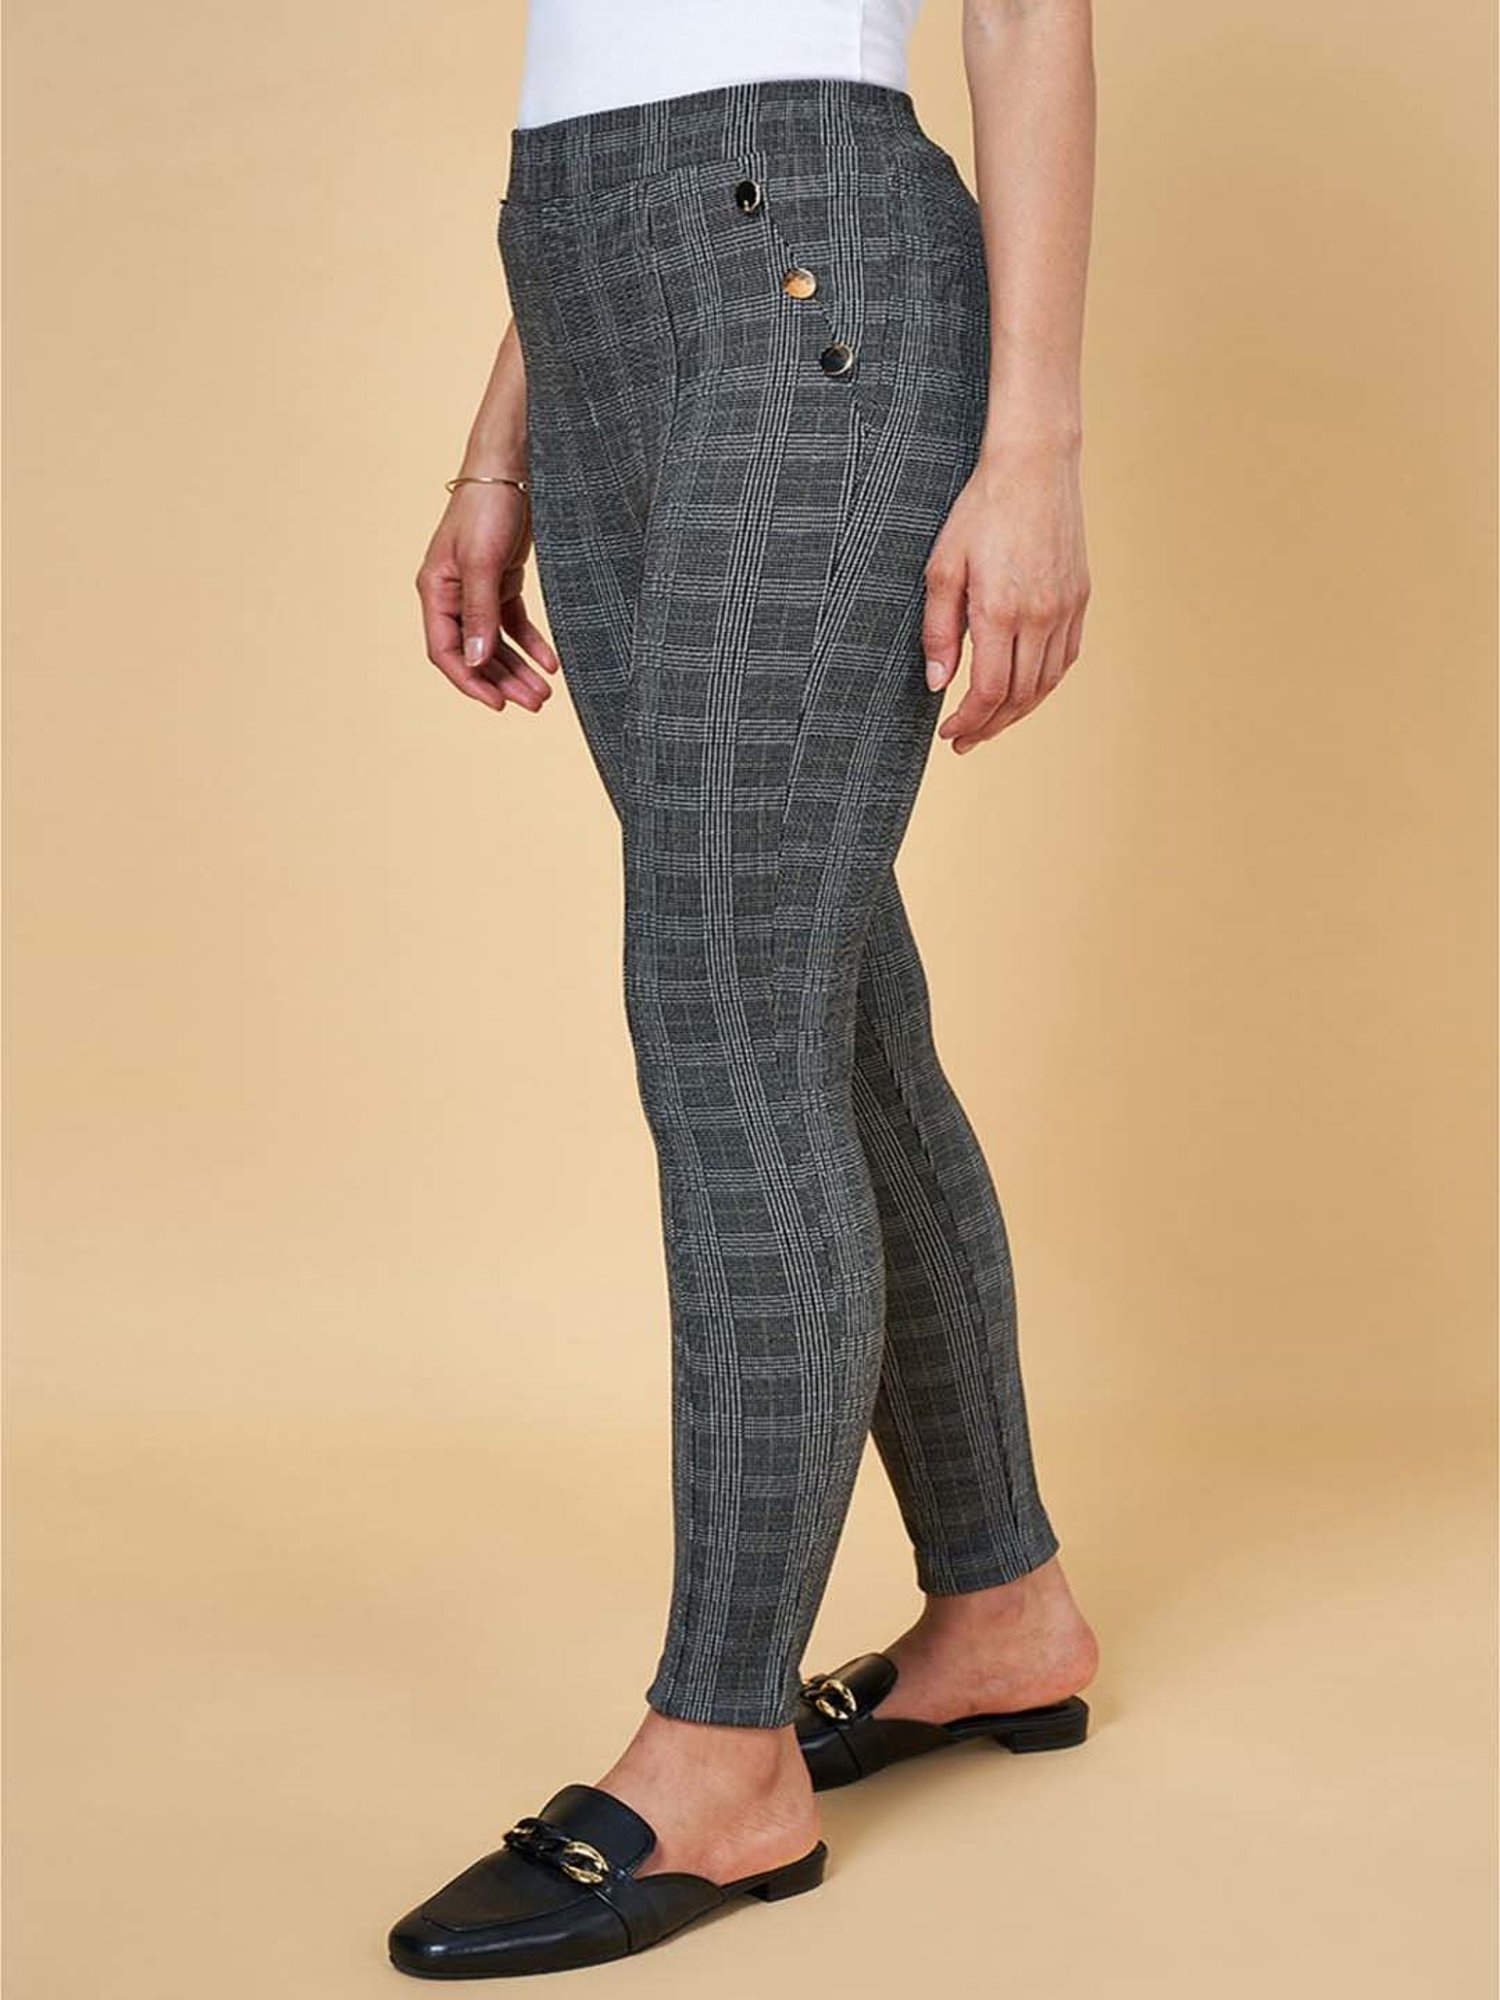 Annabelle by Pantaloons Grey Chequered Treggings